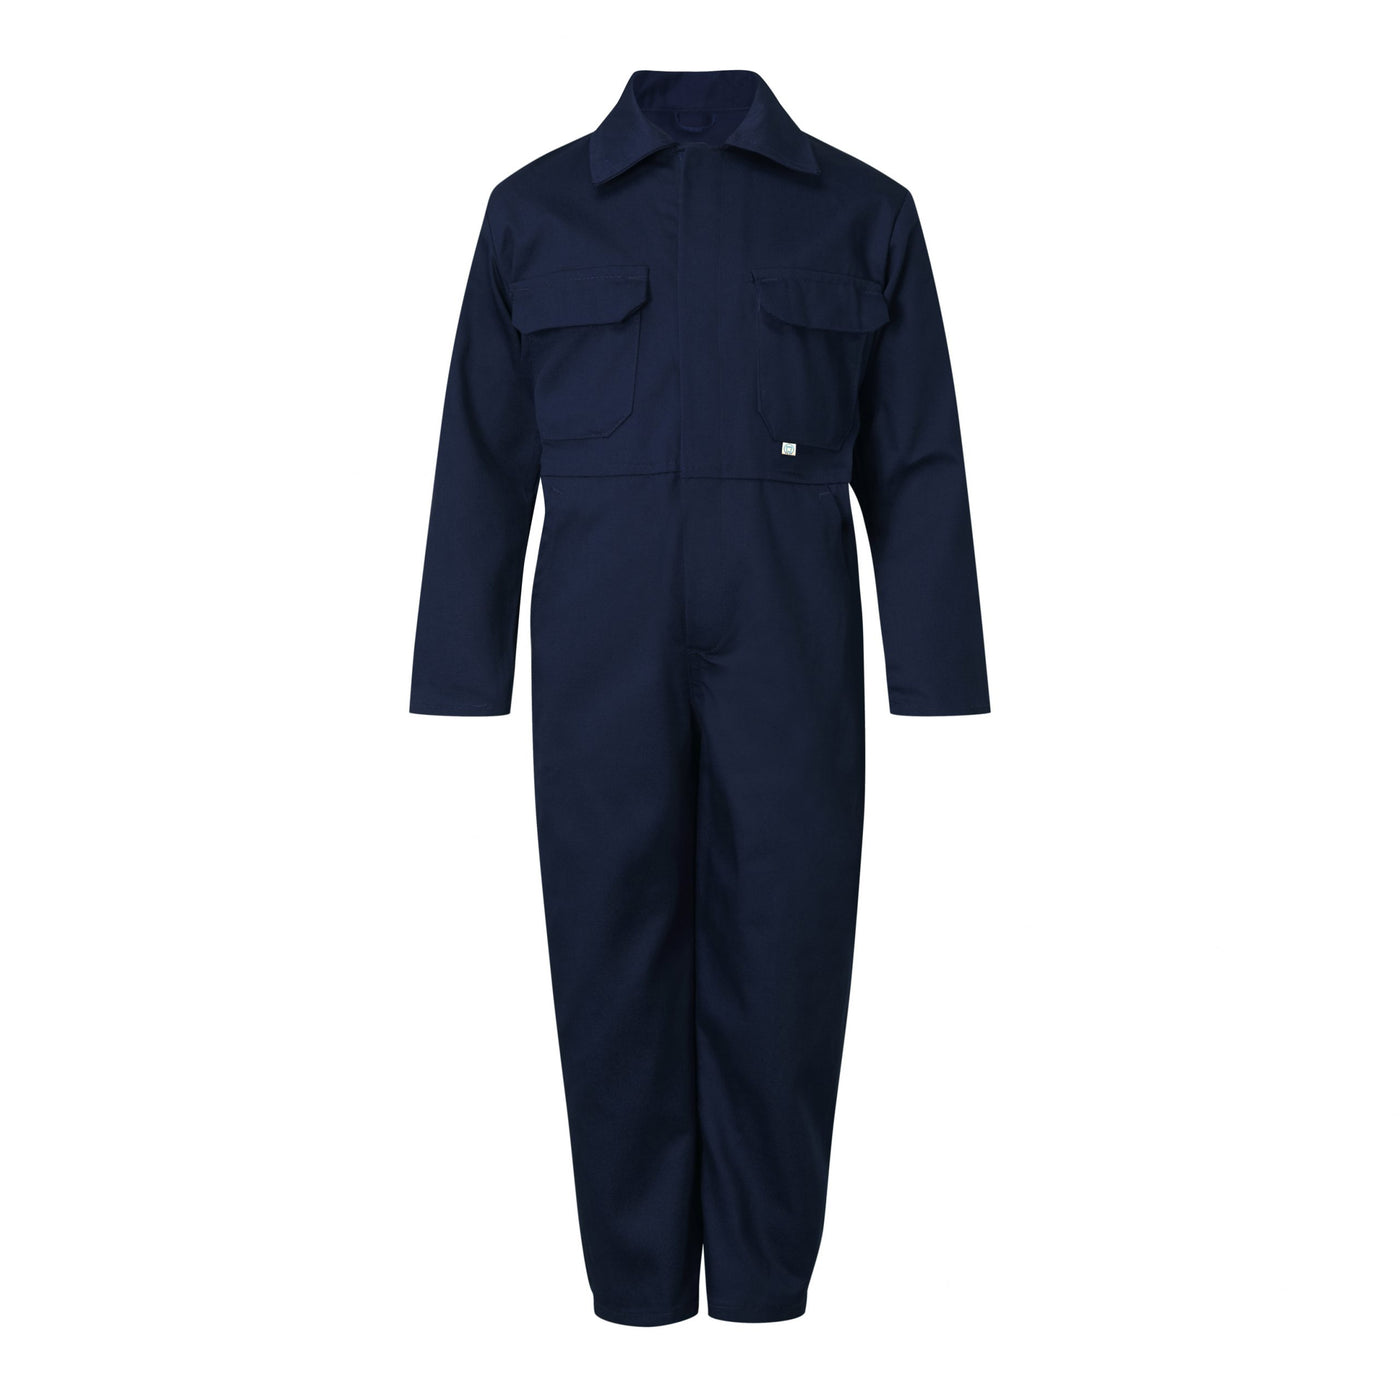 Castle Clothing 333 Kids Overall, Navy